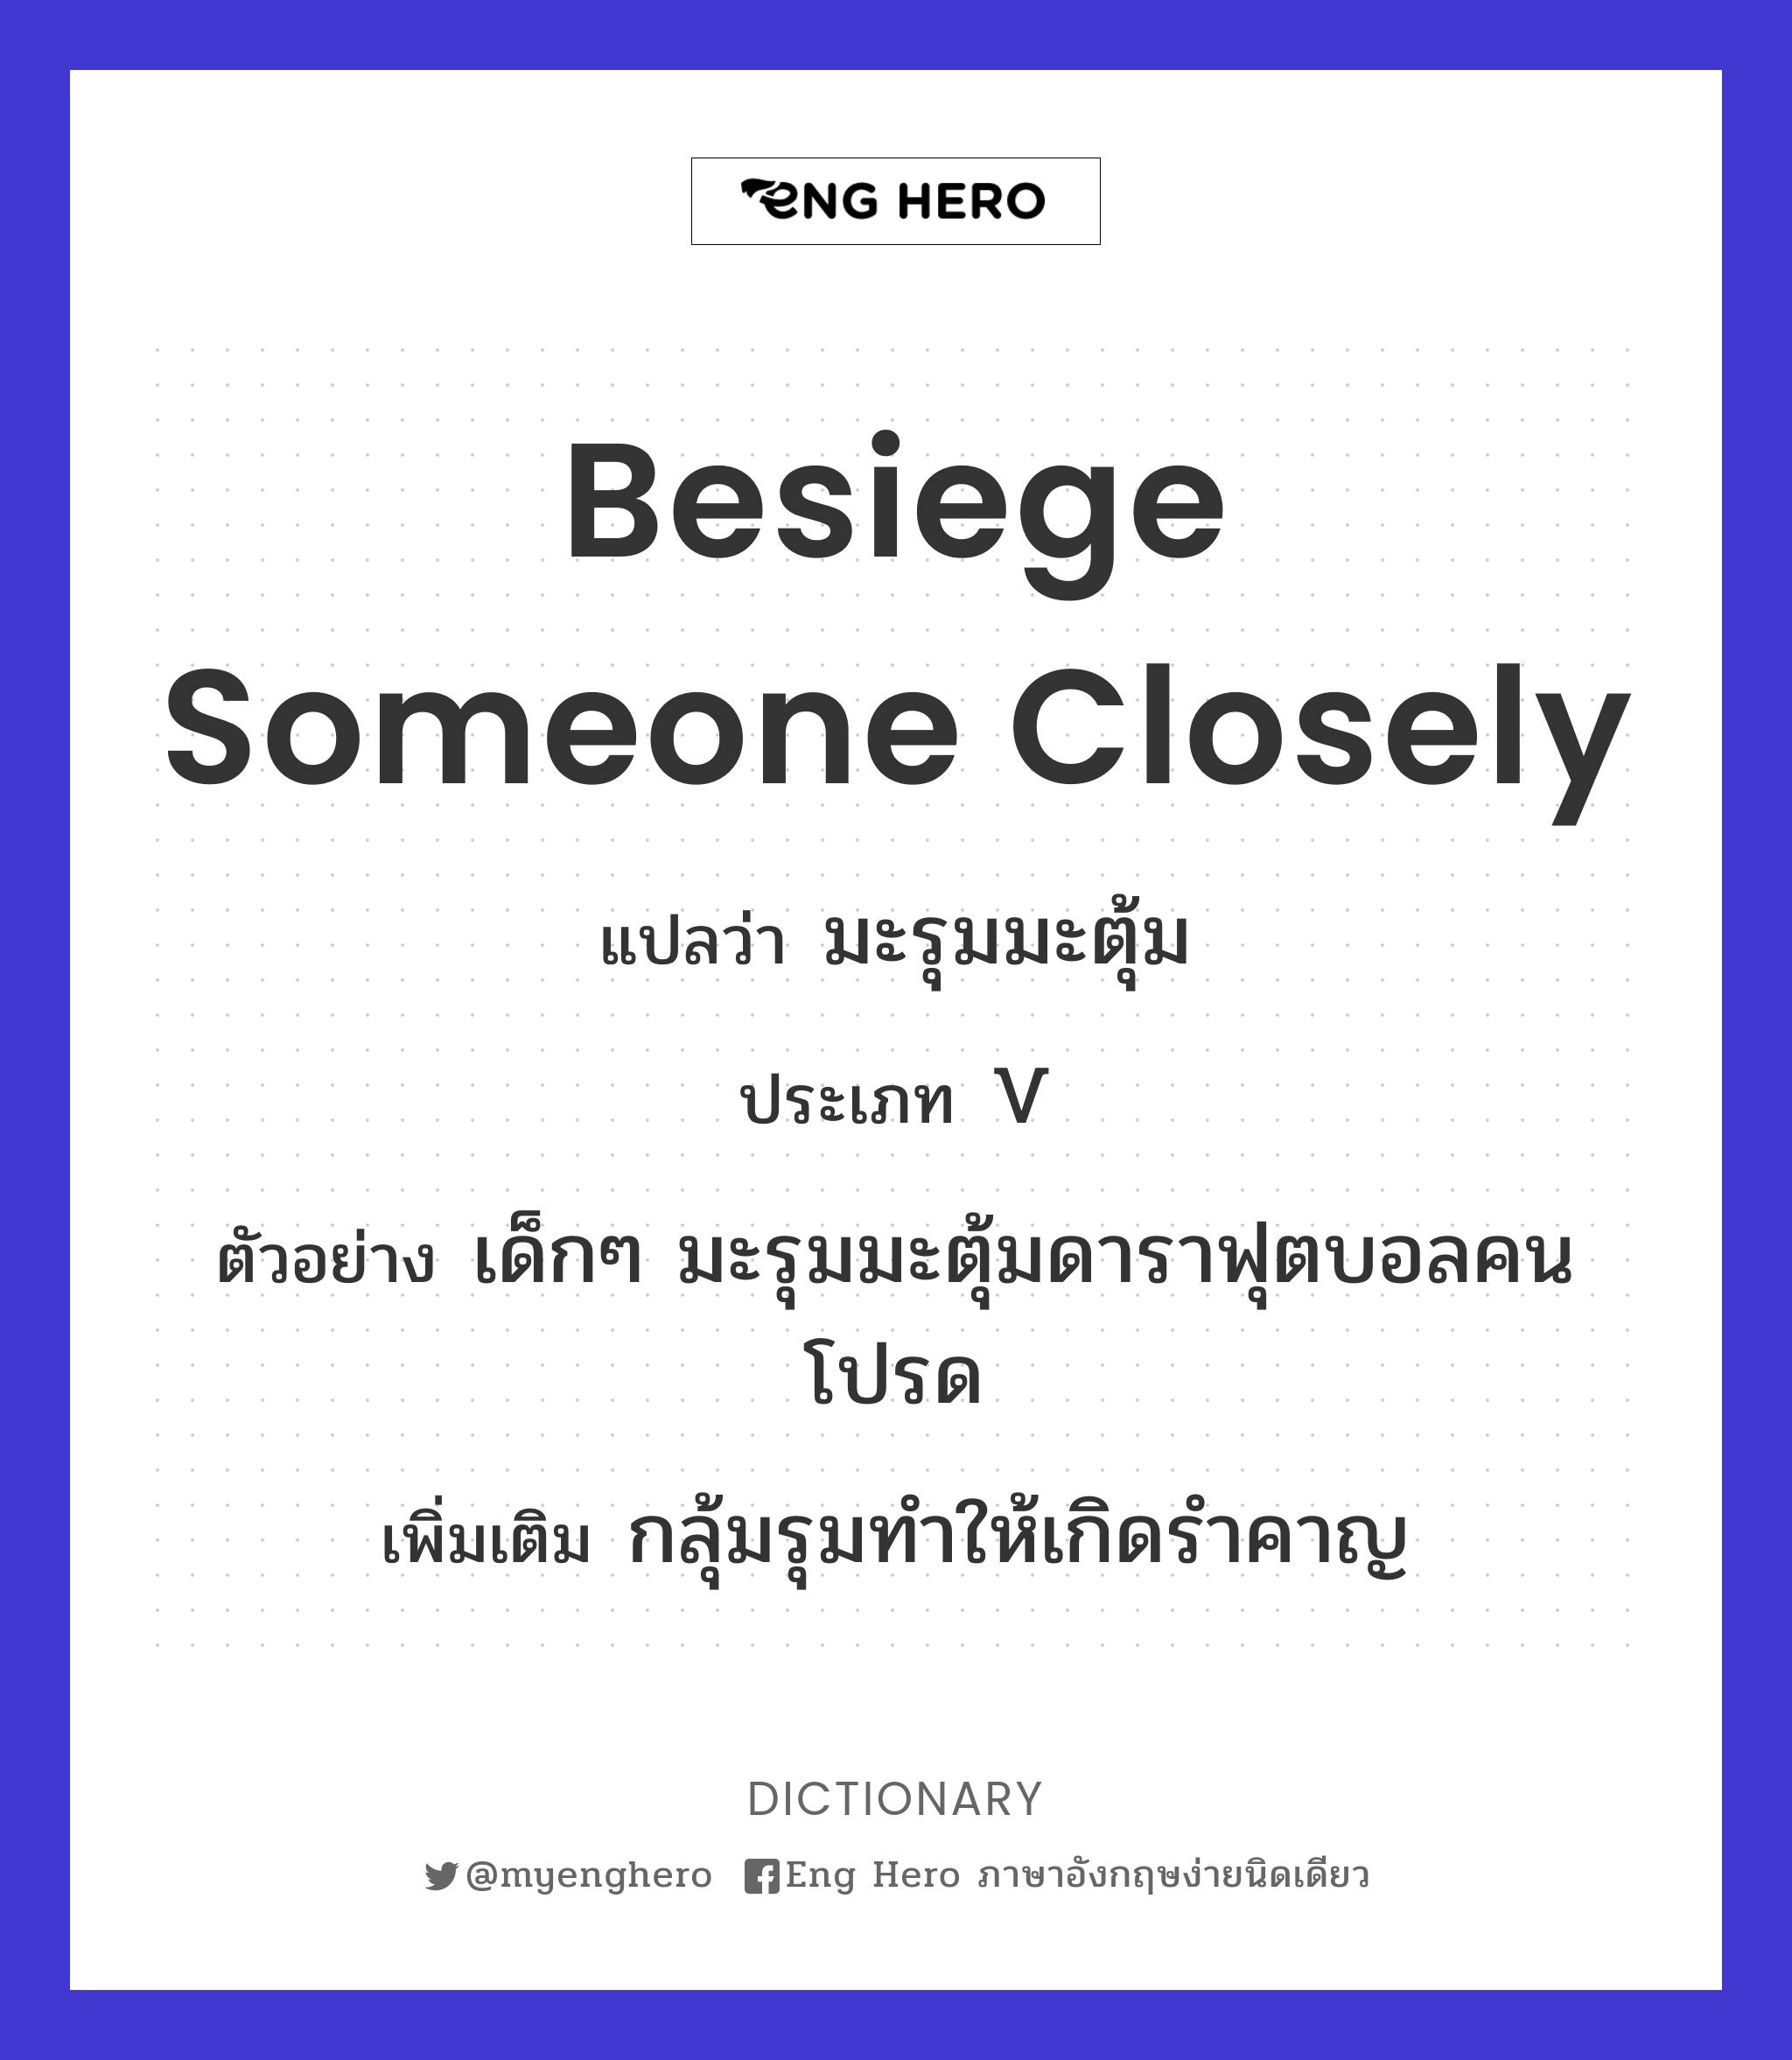 besiege someone closely